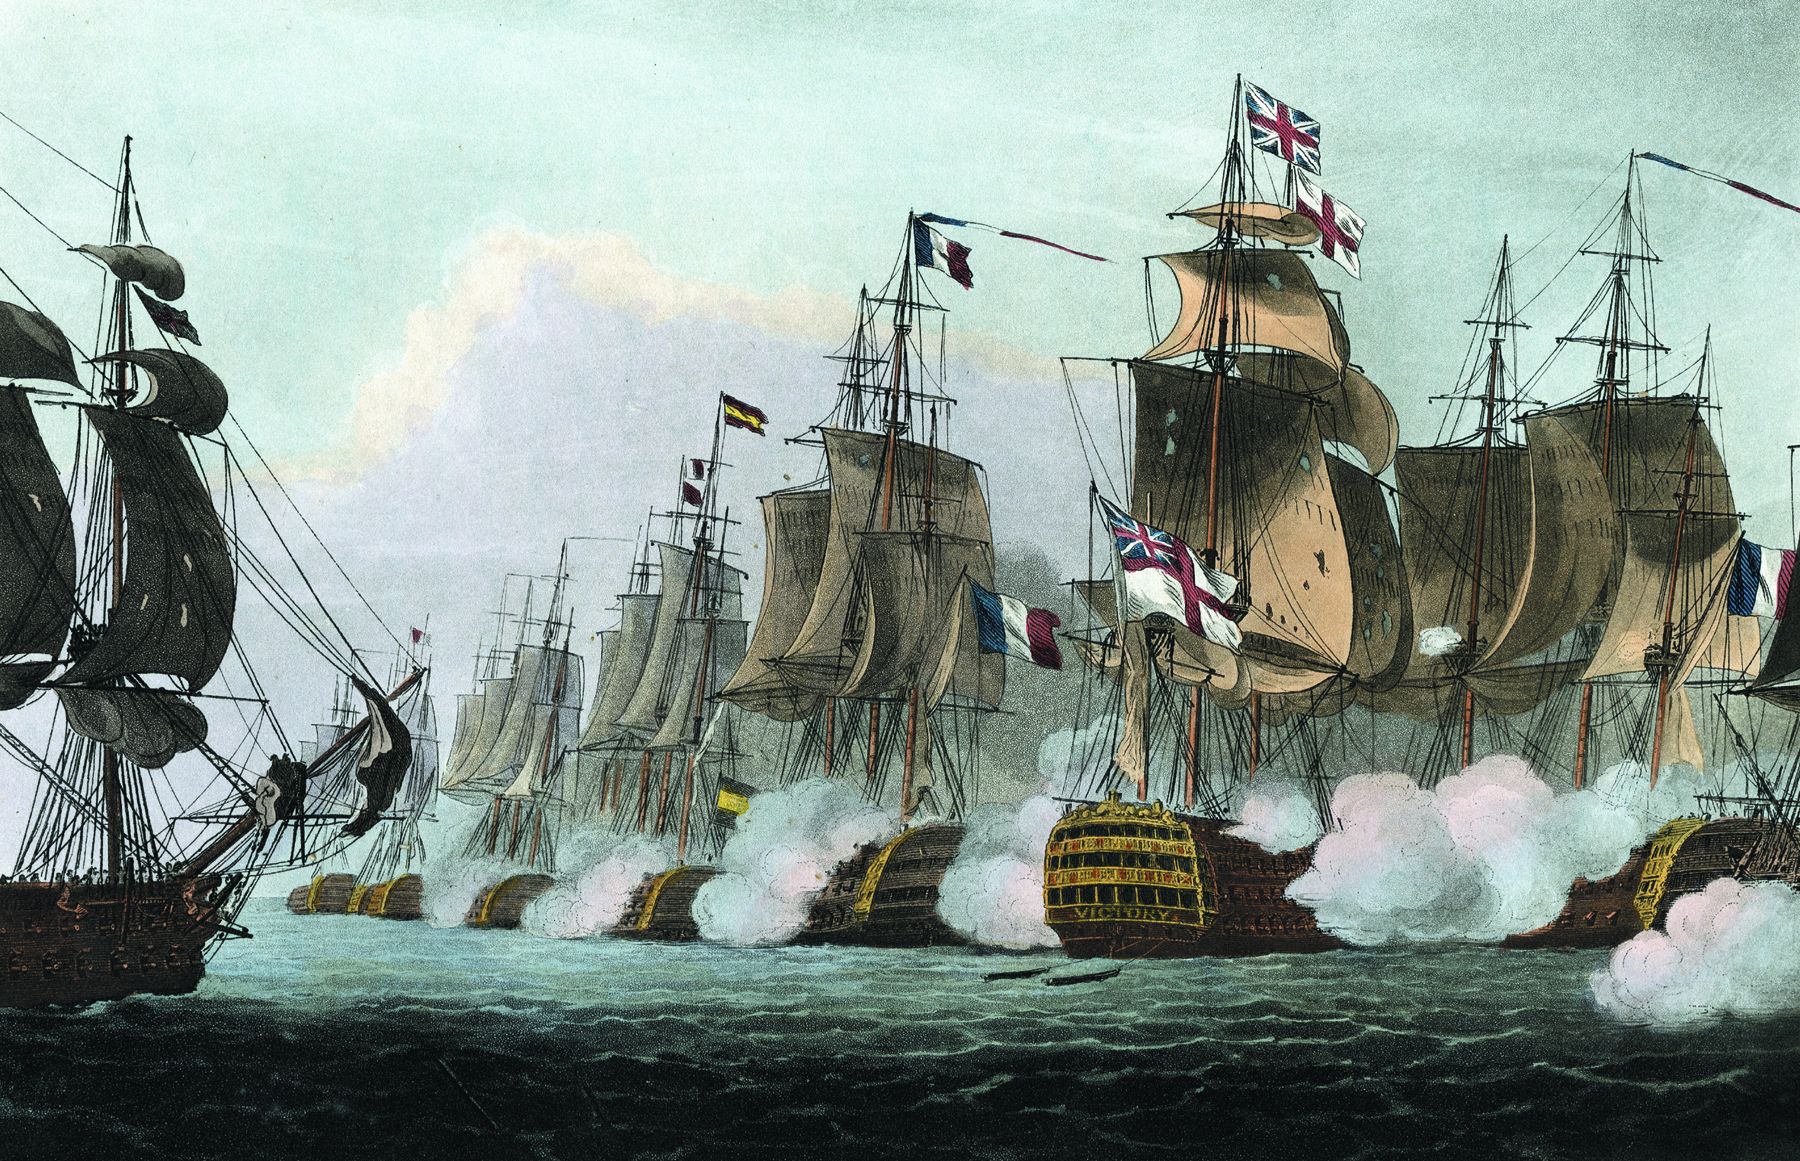 In this painting we can see the British, French and Spanish flags atop the mast's.